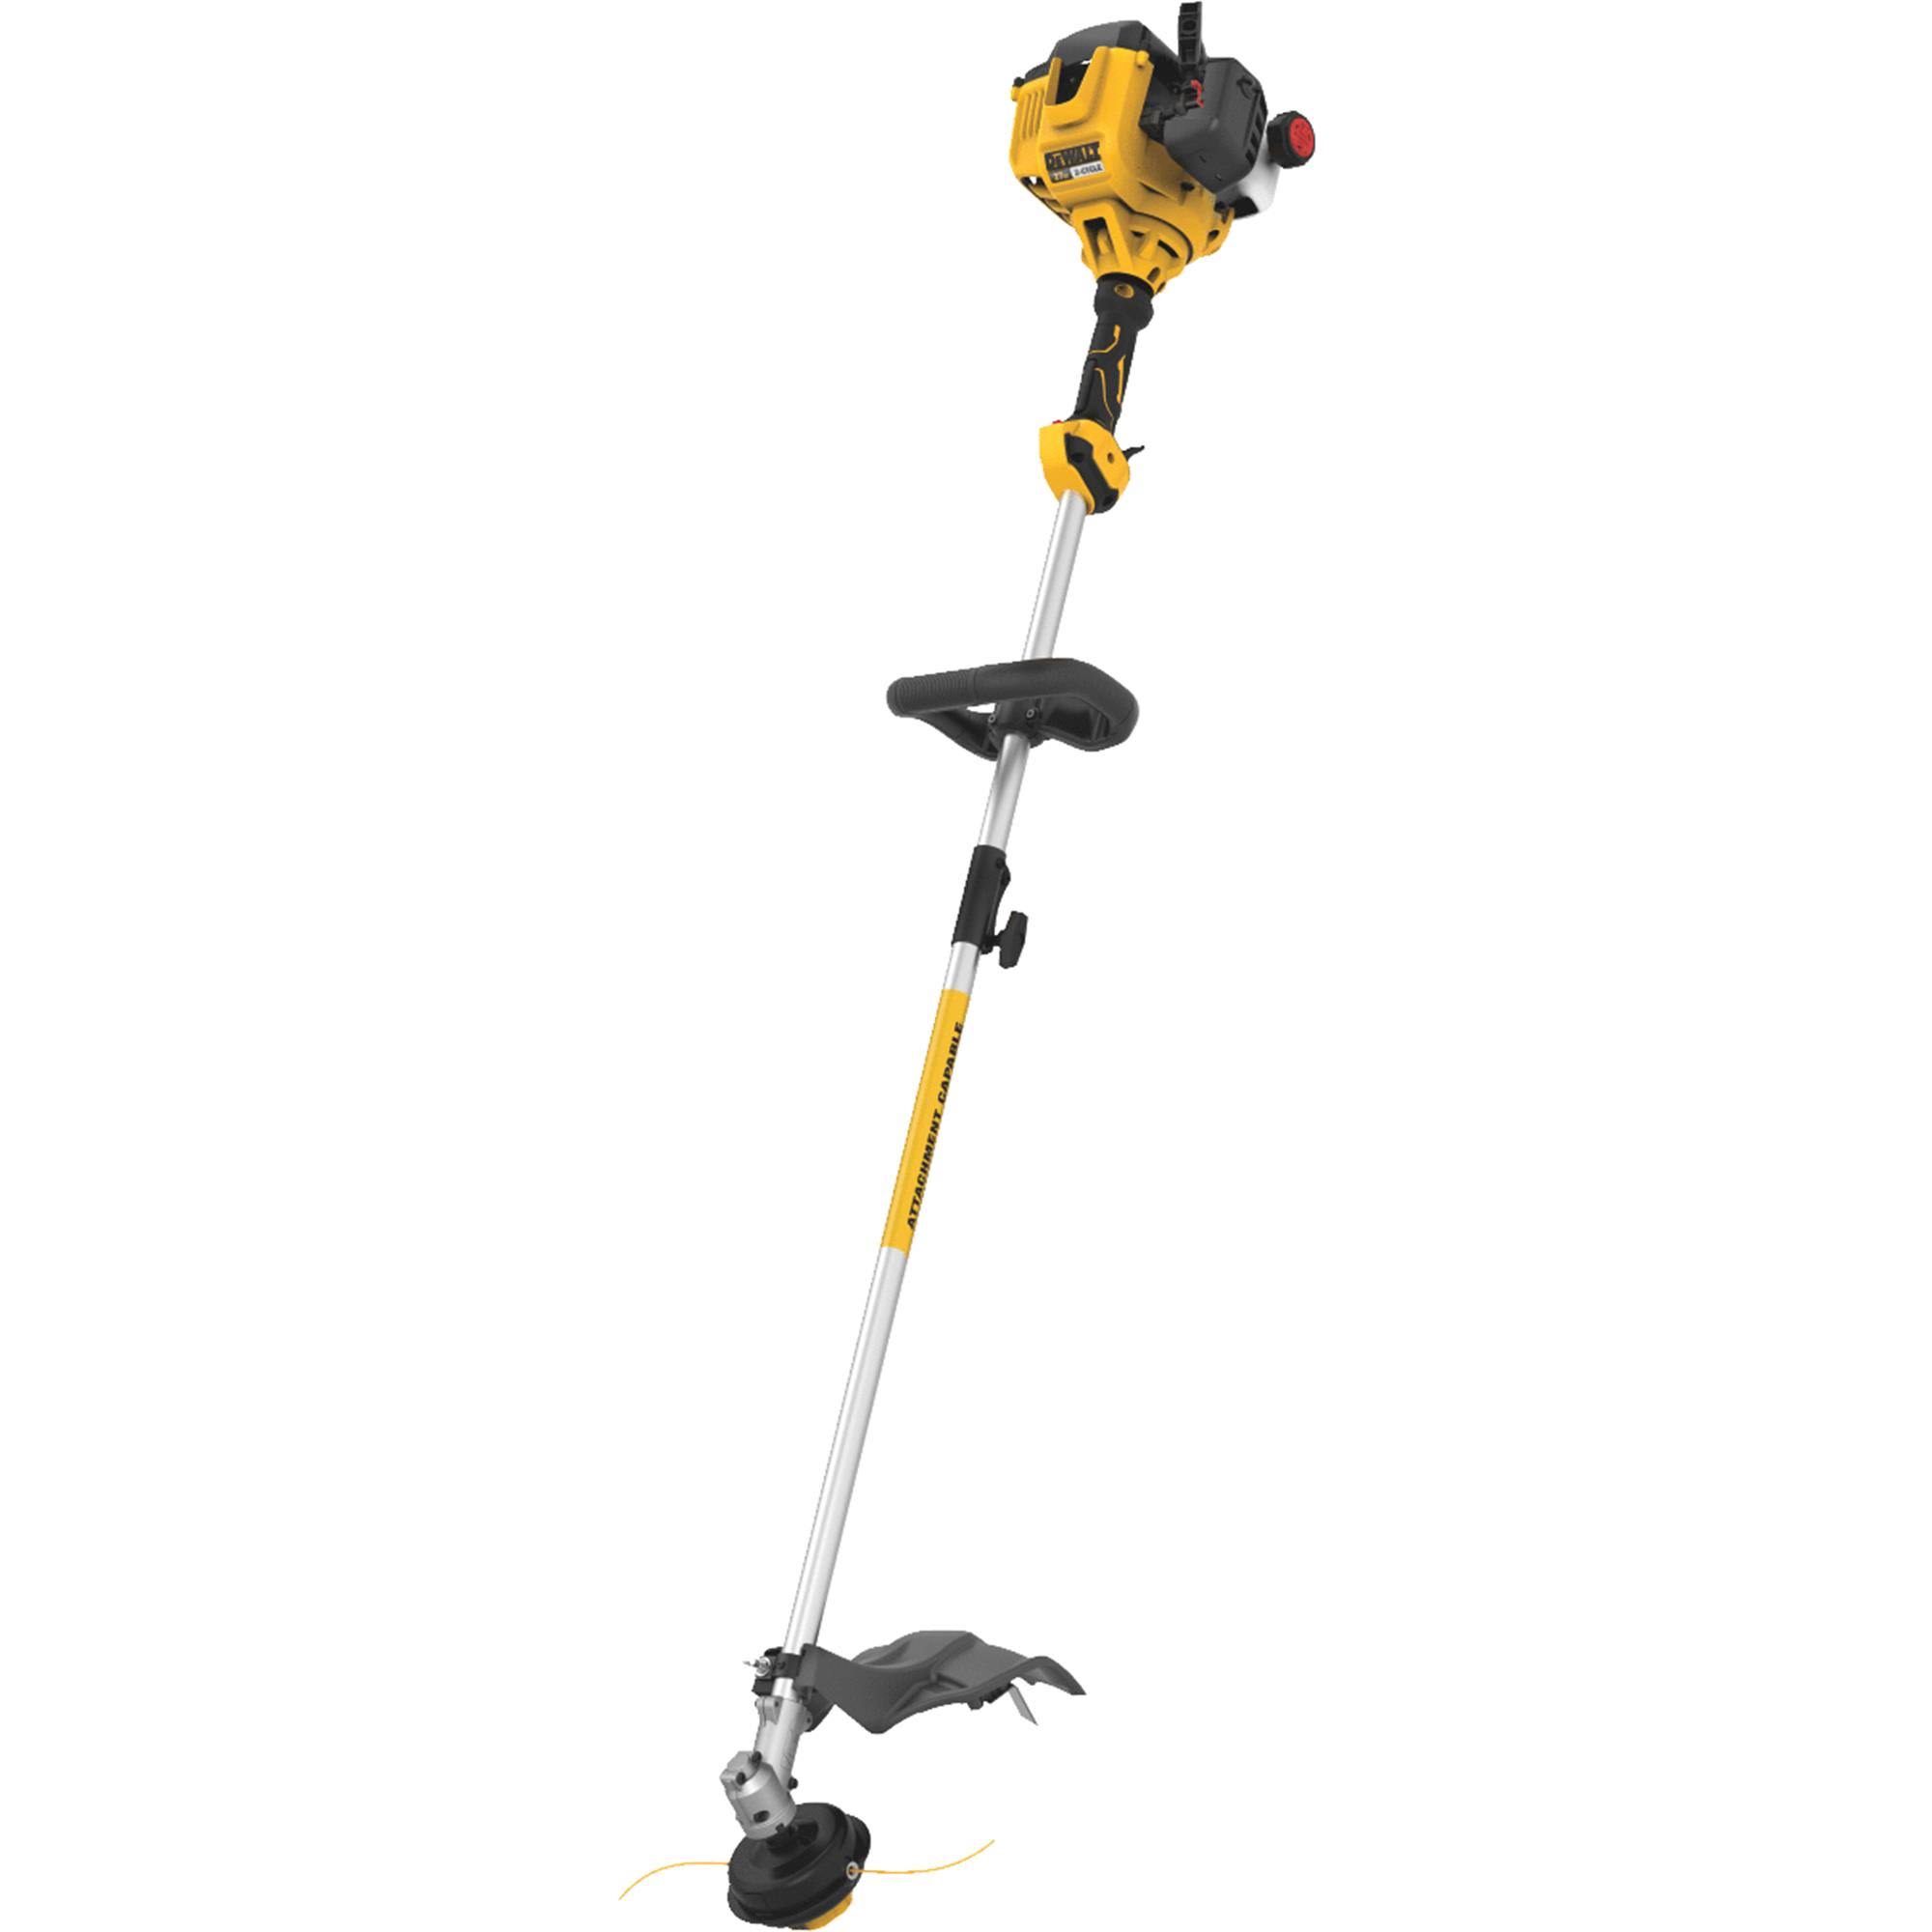 DeWalt 27cc 2-Cycle GAS Straight Shaft String Trimmer with Attachment Capability